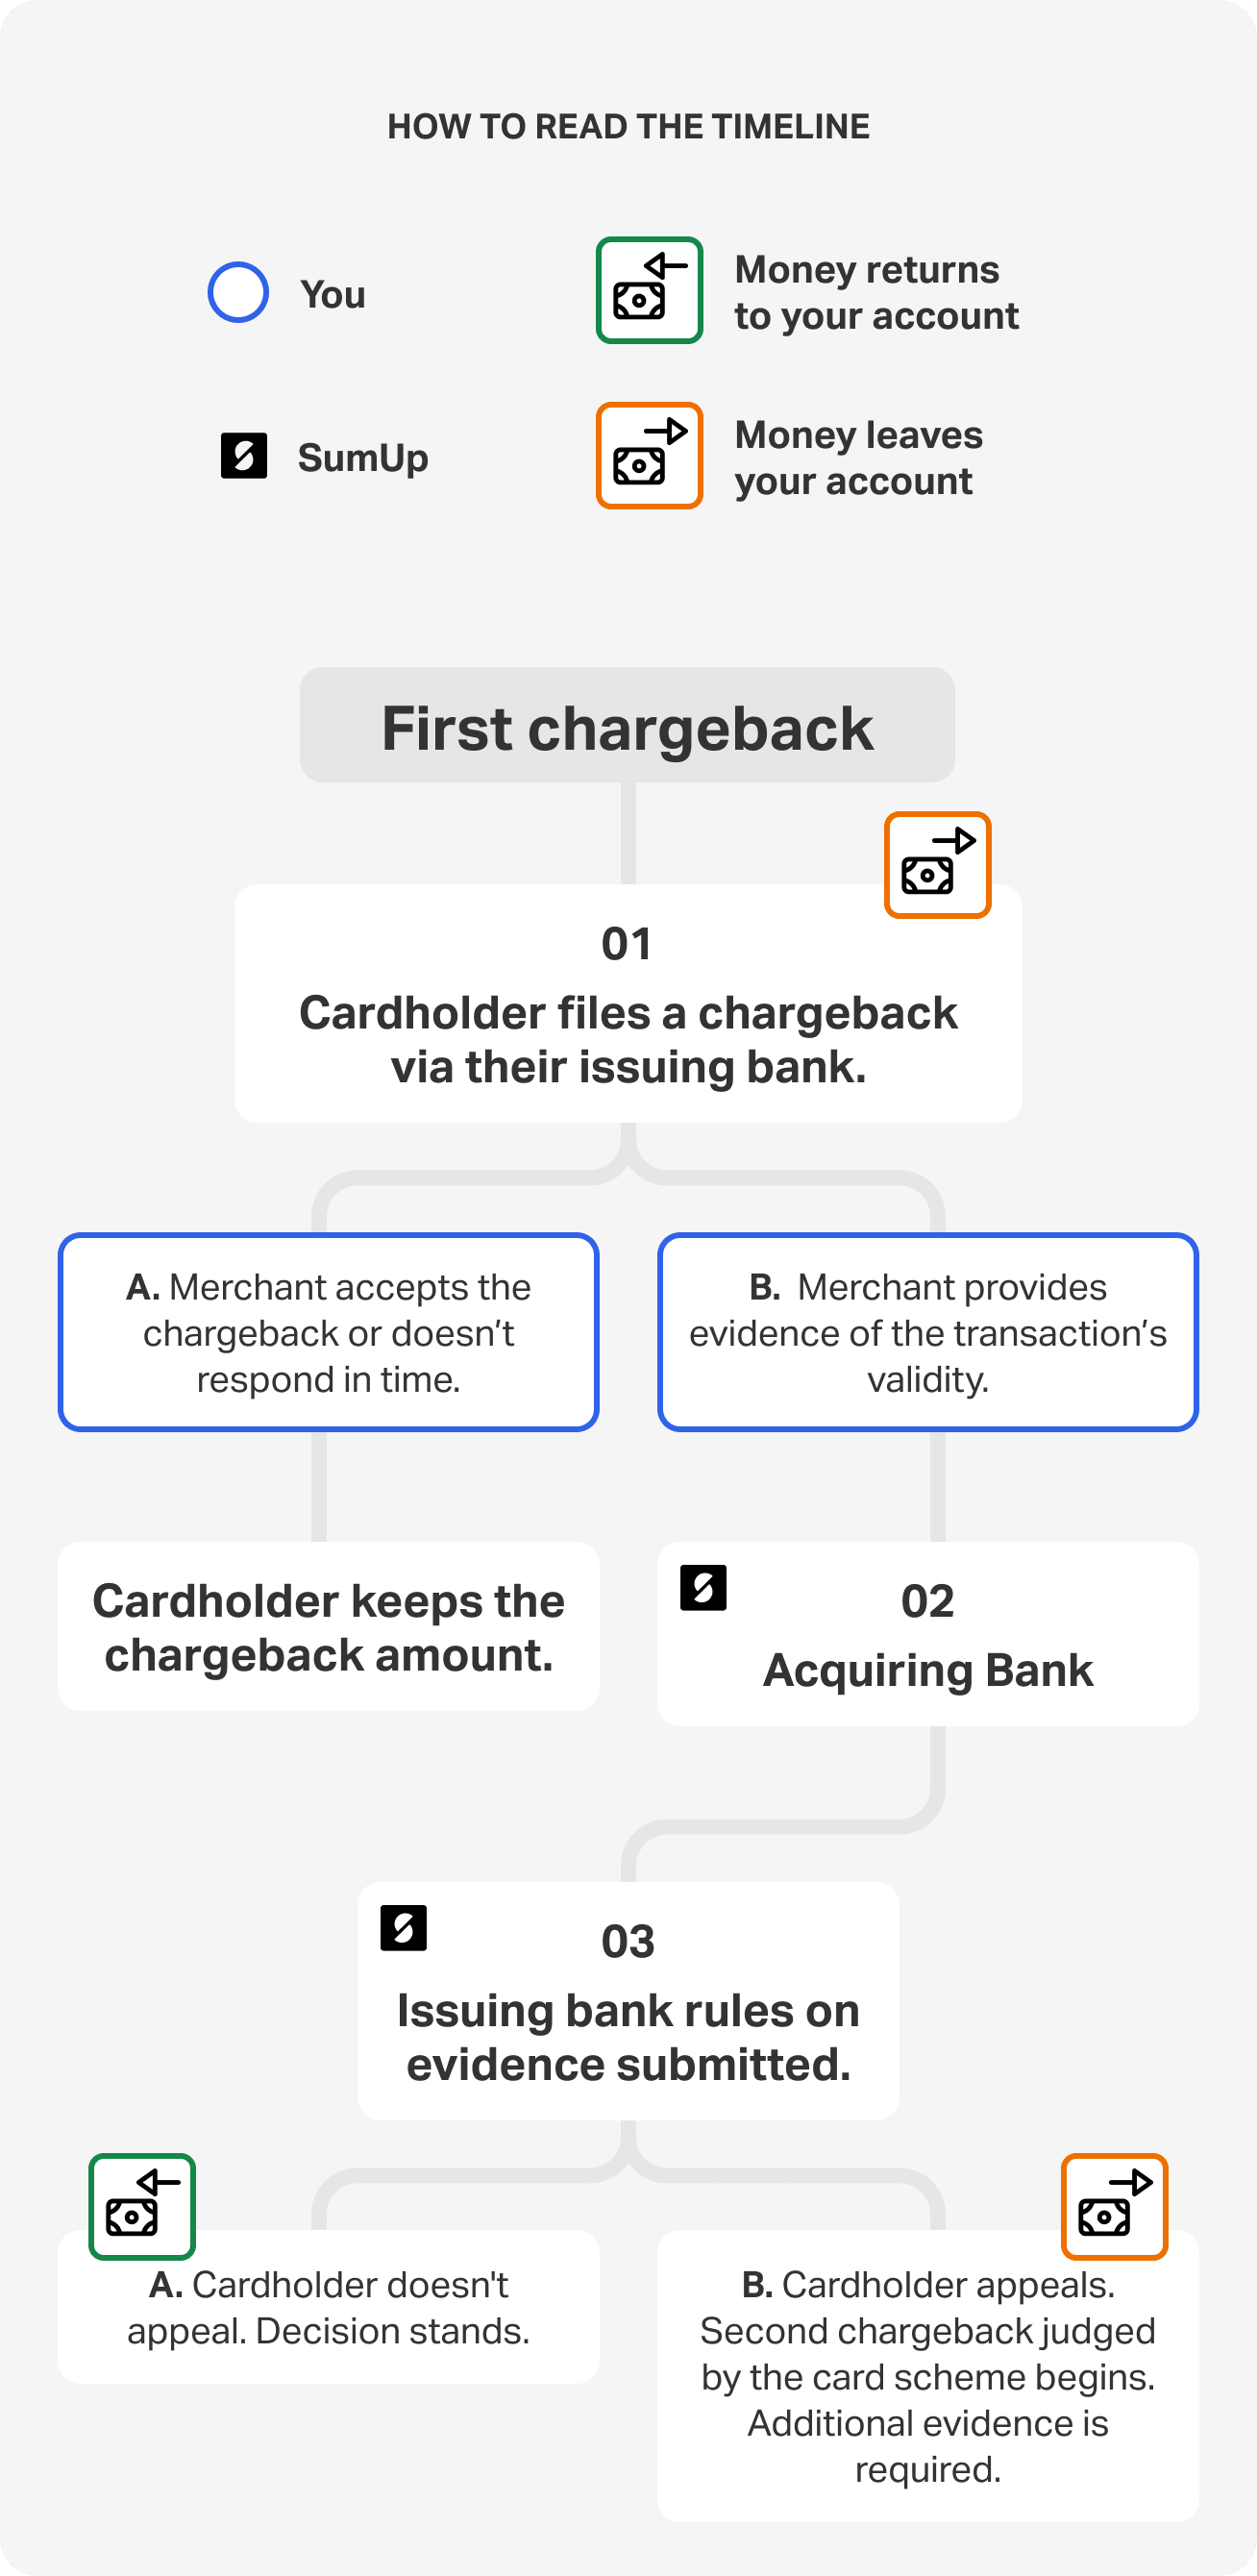 A flow chart to show the process of a chargeback.
1. Cardholder files for a chargeback.
2. Merchant choose whether to challenge and provides evidence of the transaction's validity.
3. Issuing bank rules based on available evidence.
4. A second chargeback may occur if the cardholder loses and opts to appeal.